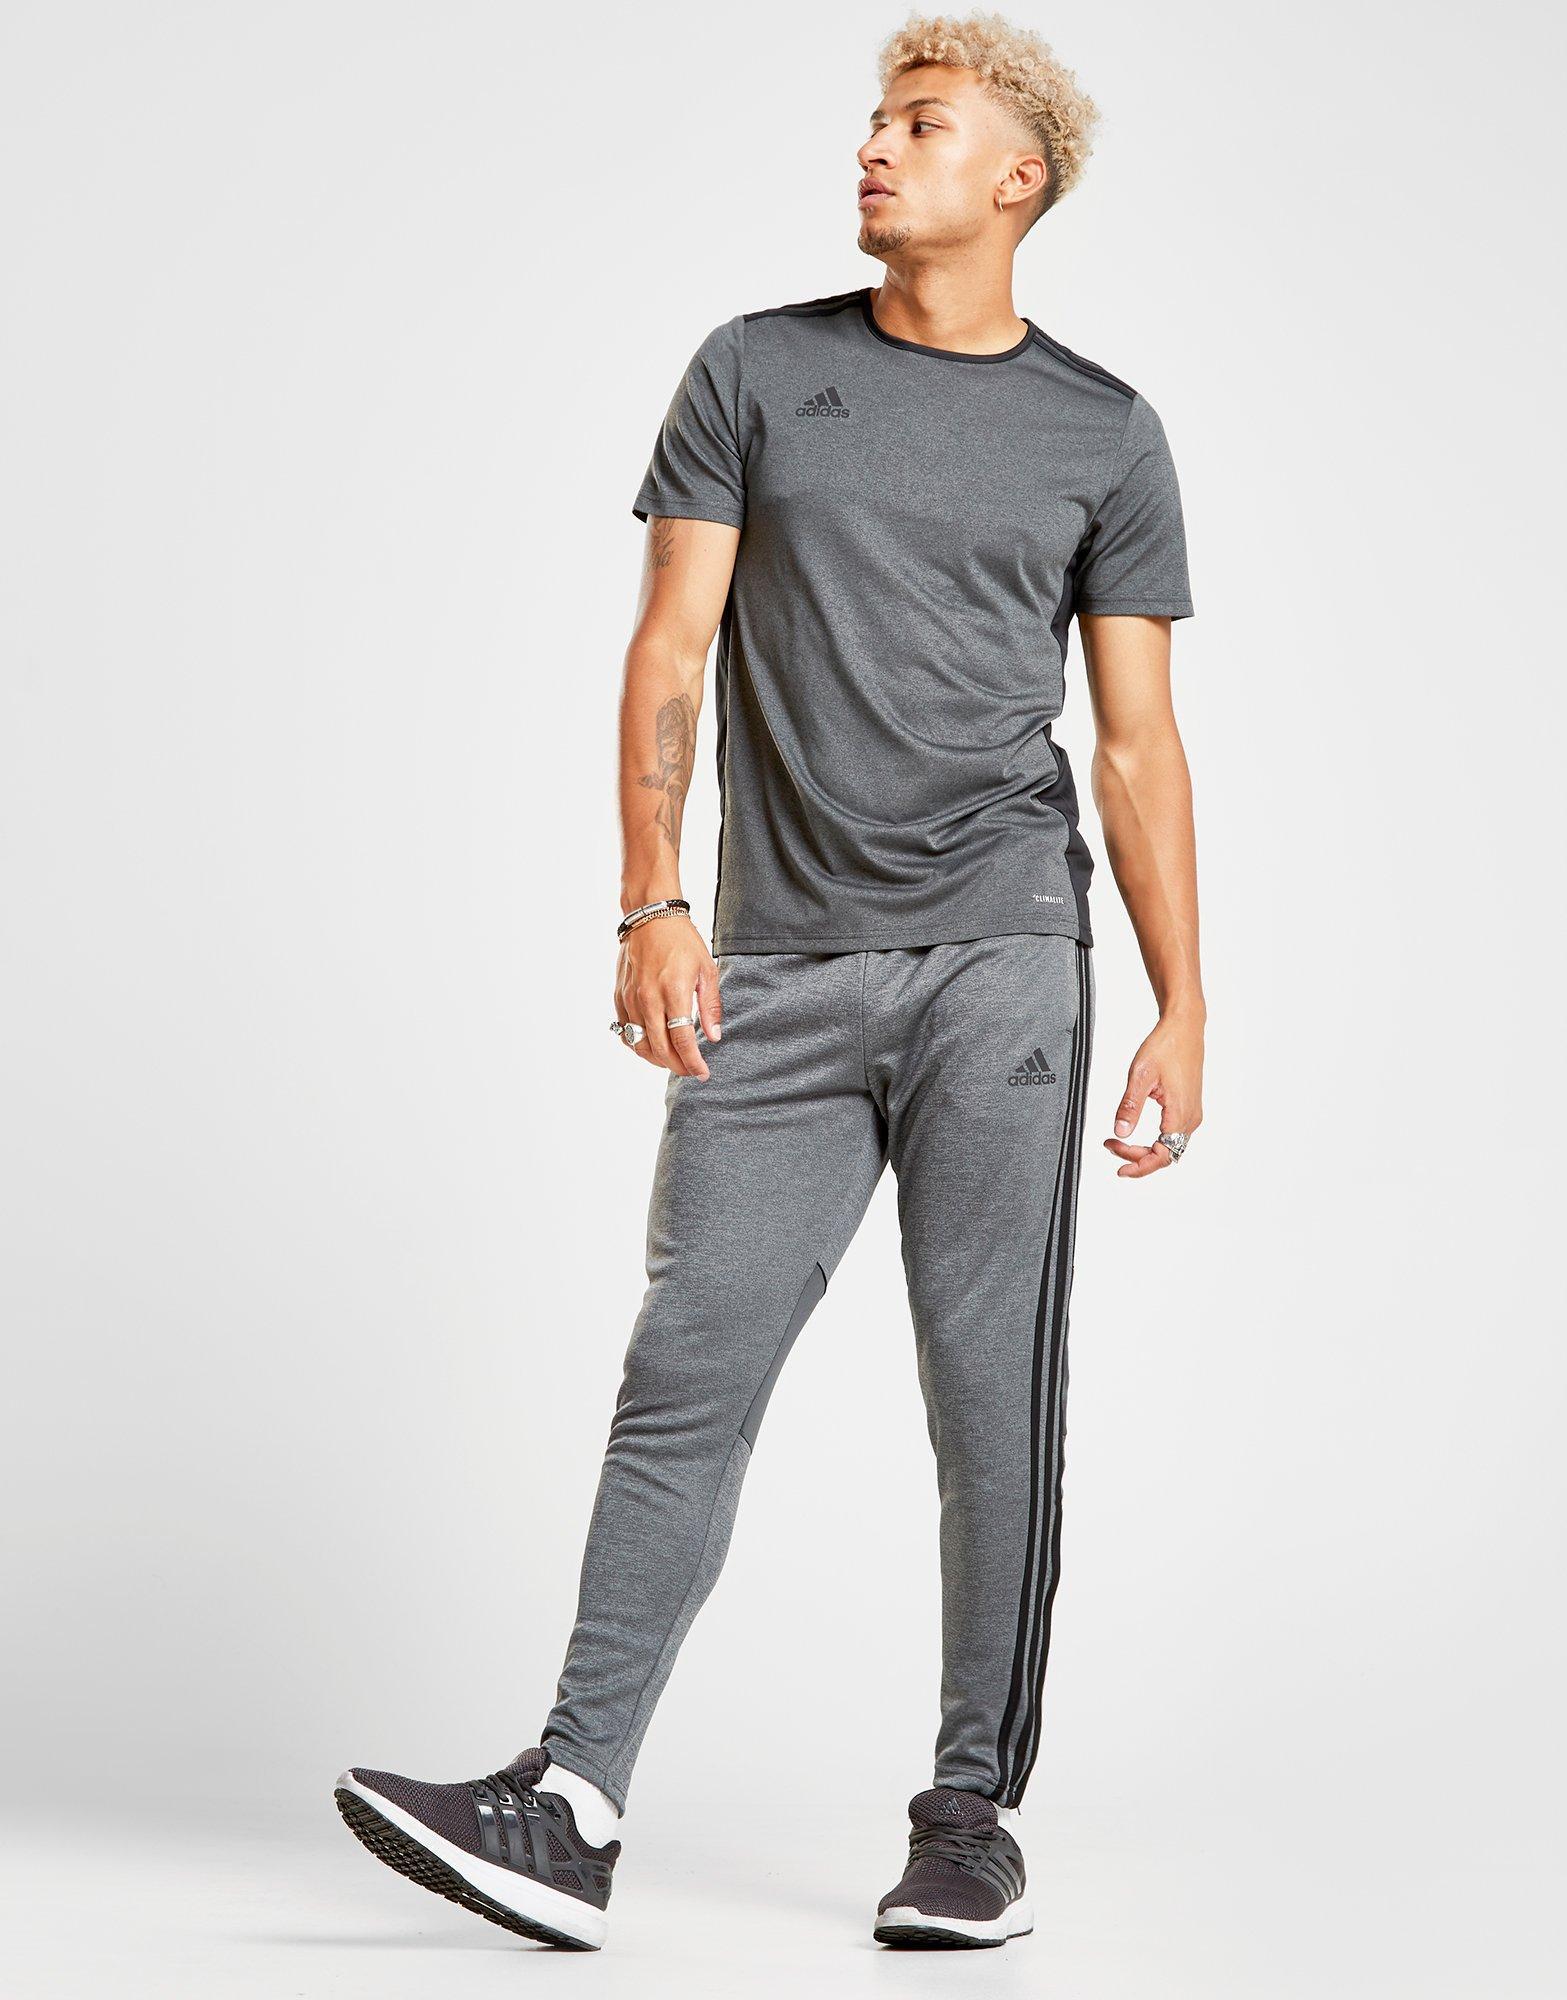 adidas Synthetic Tango Track Pants in Grey (Gray) for Men - Lyst